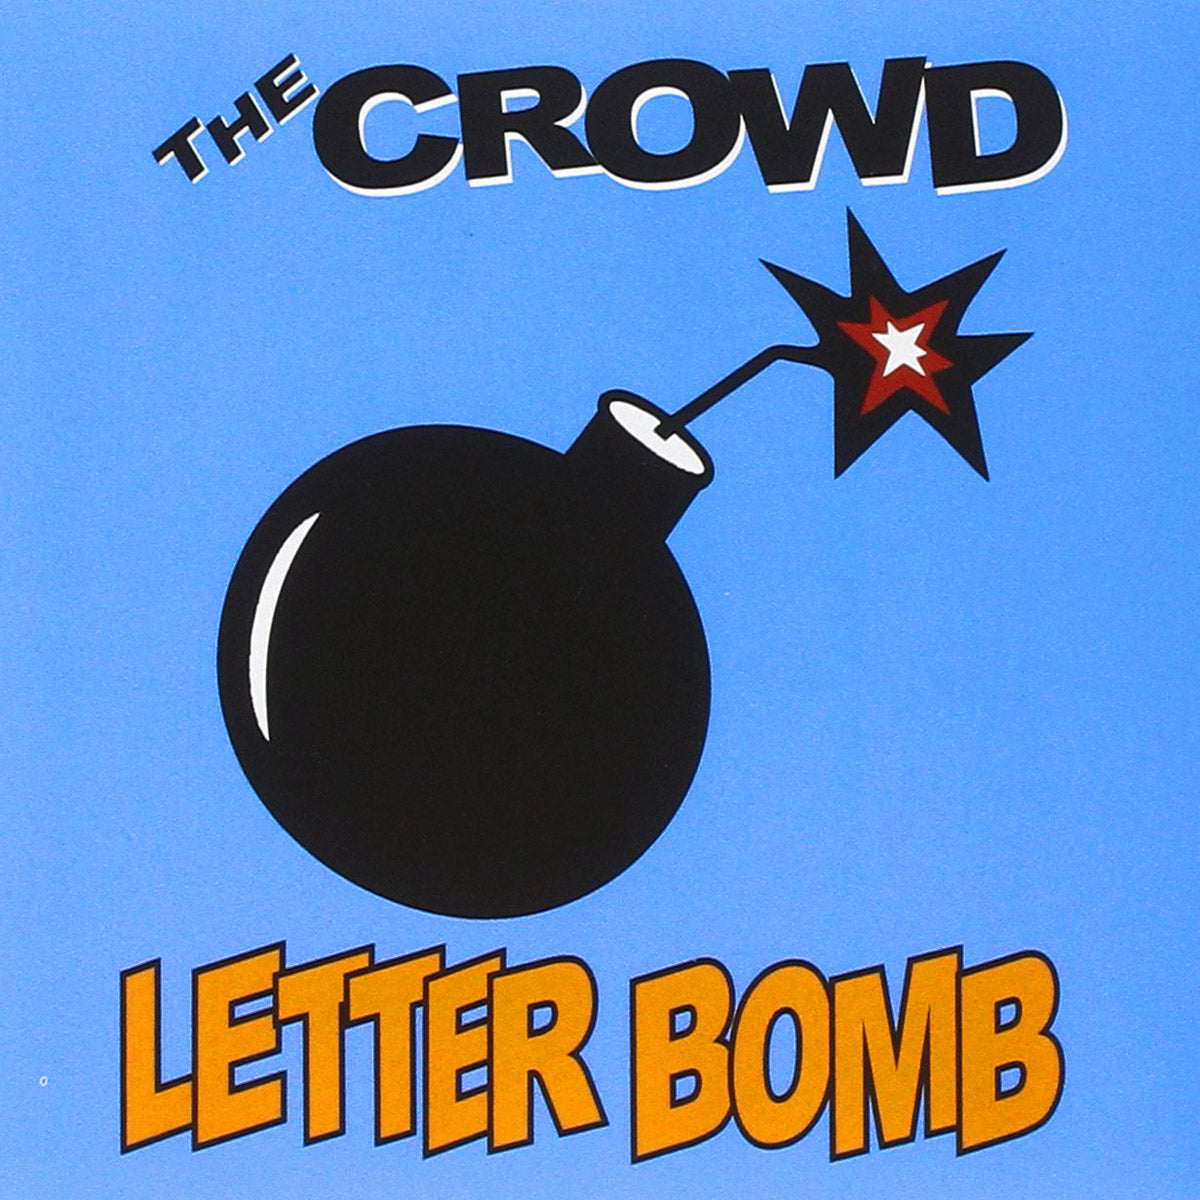 The Crowd- Letterbomb CD ~REISSUE!